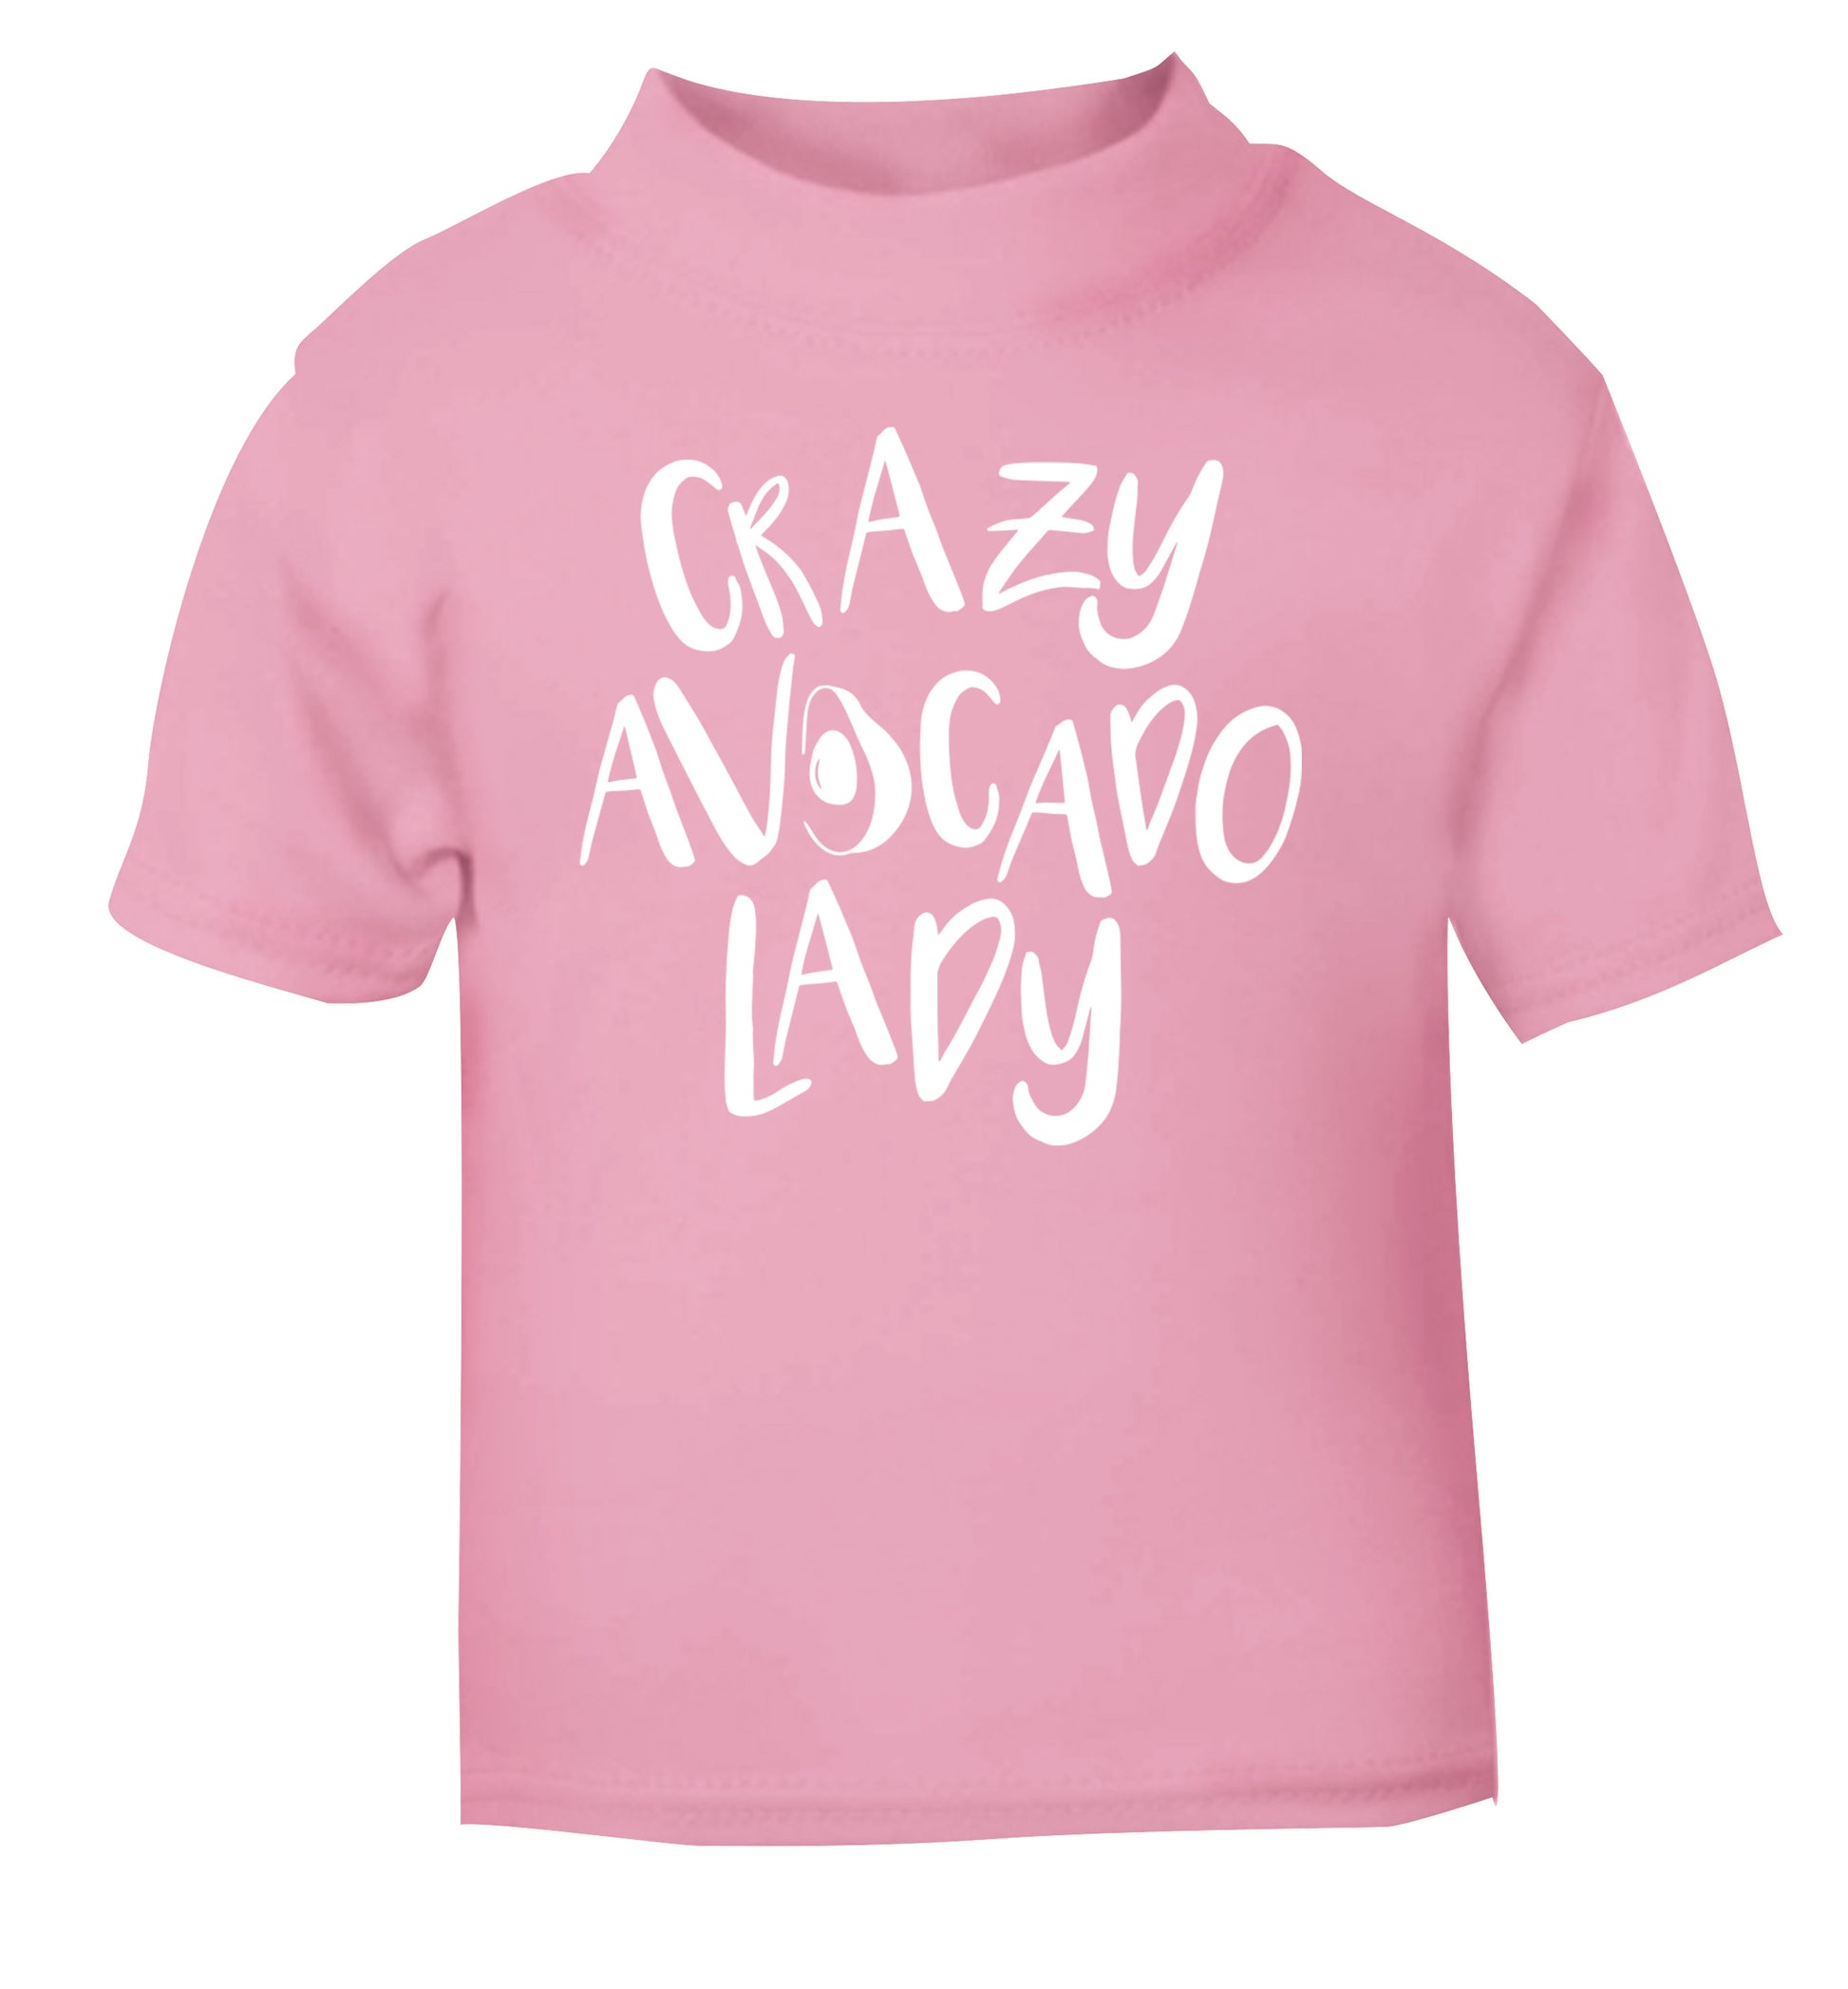 Crazy avocado lady light pink Baby Toddler Tshirt 2 Years